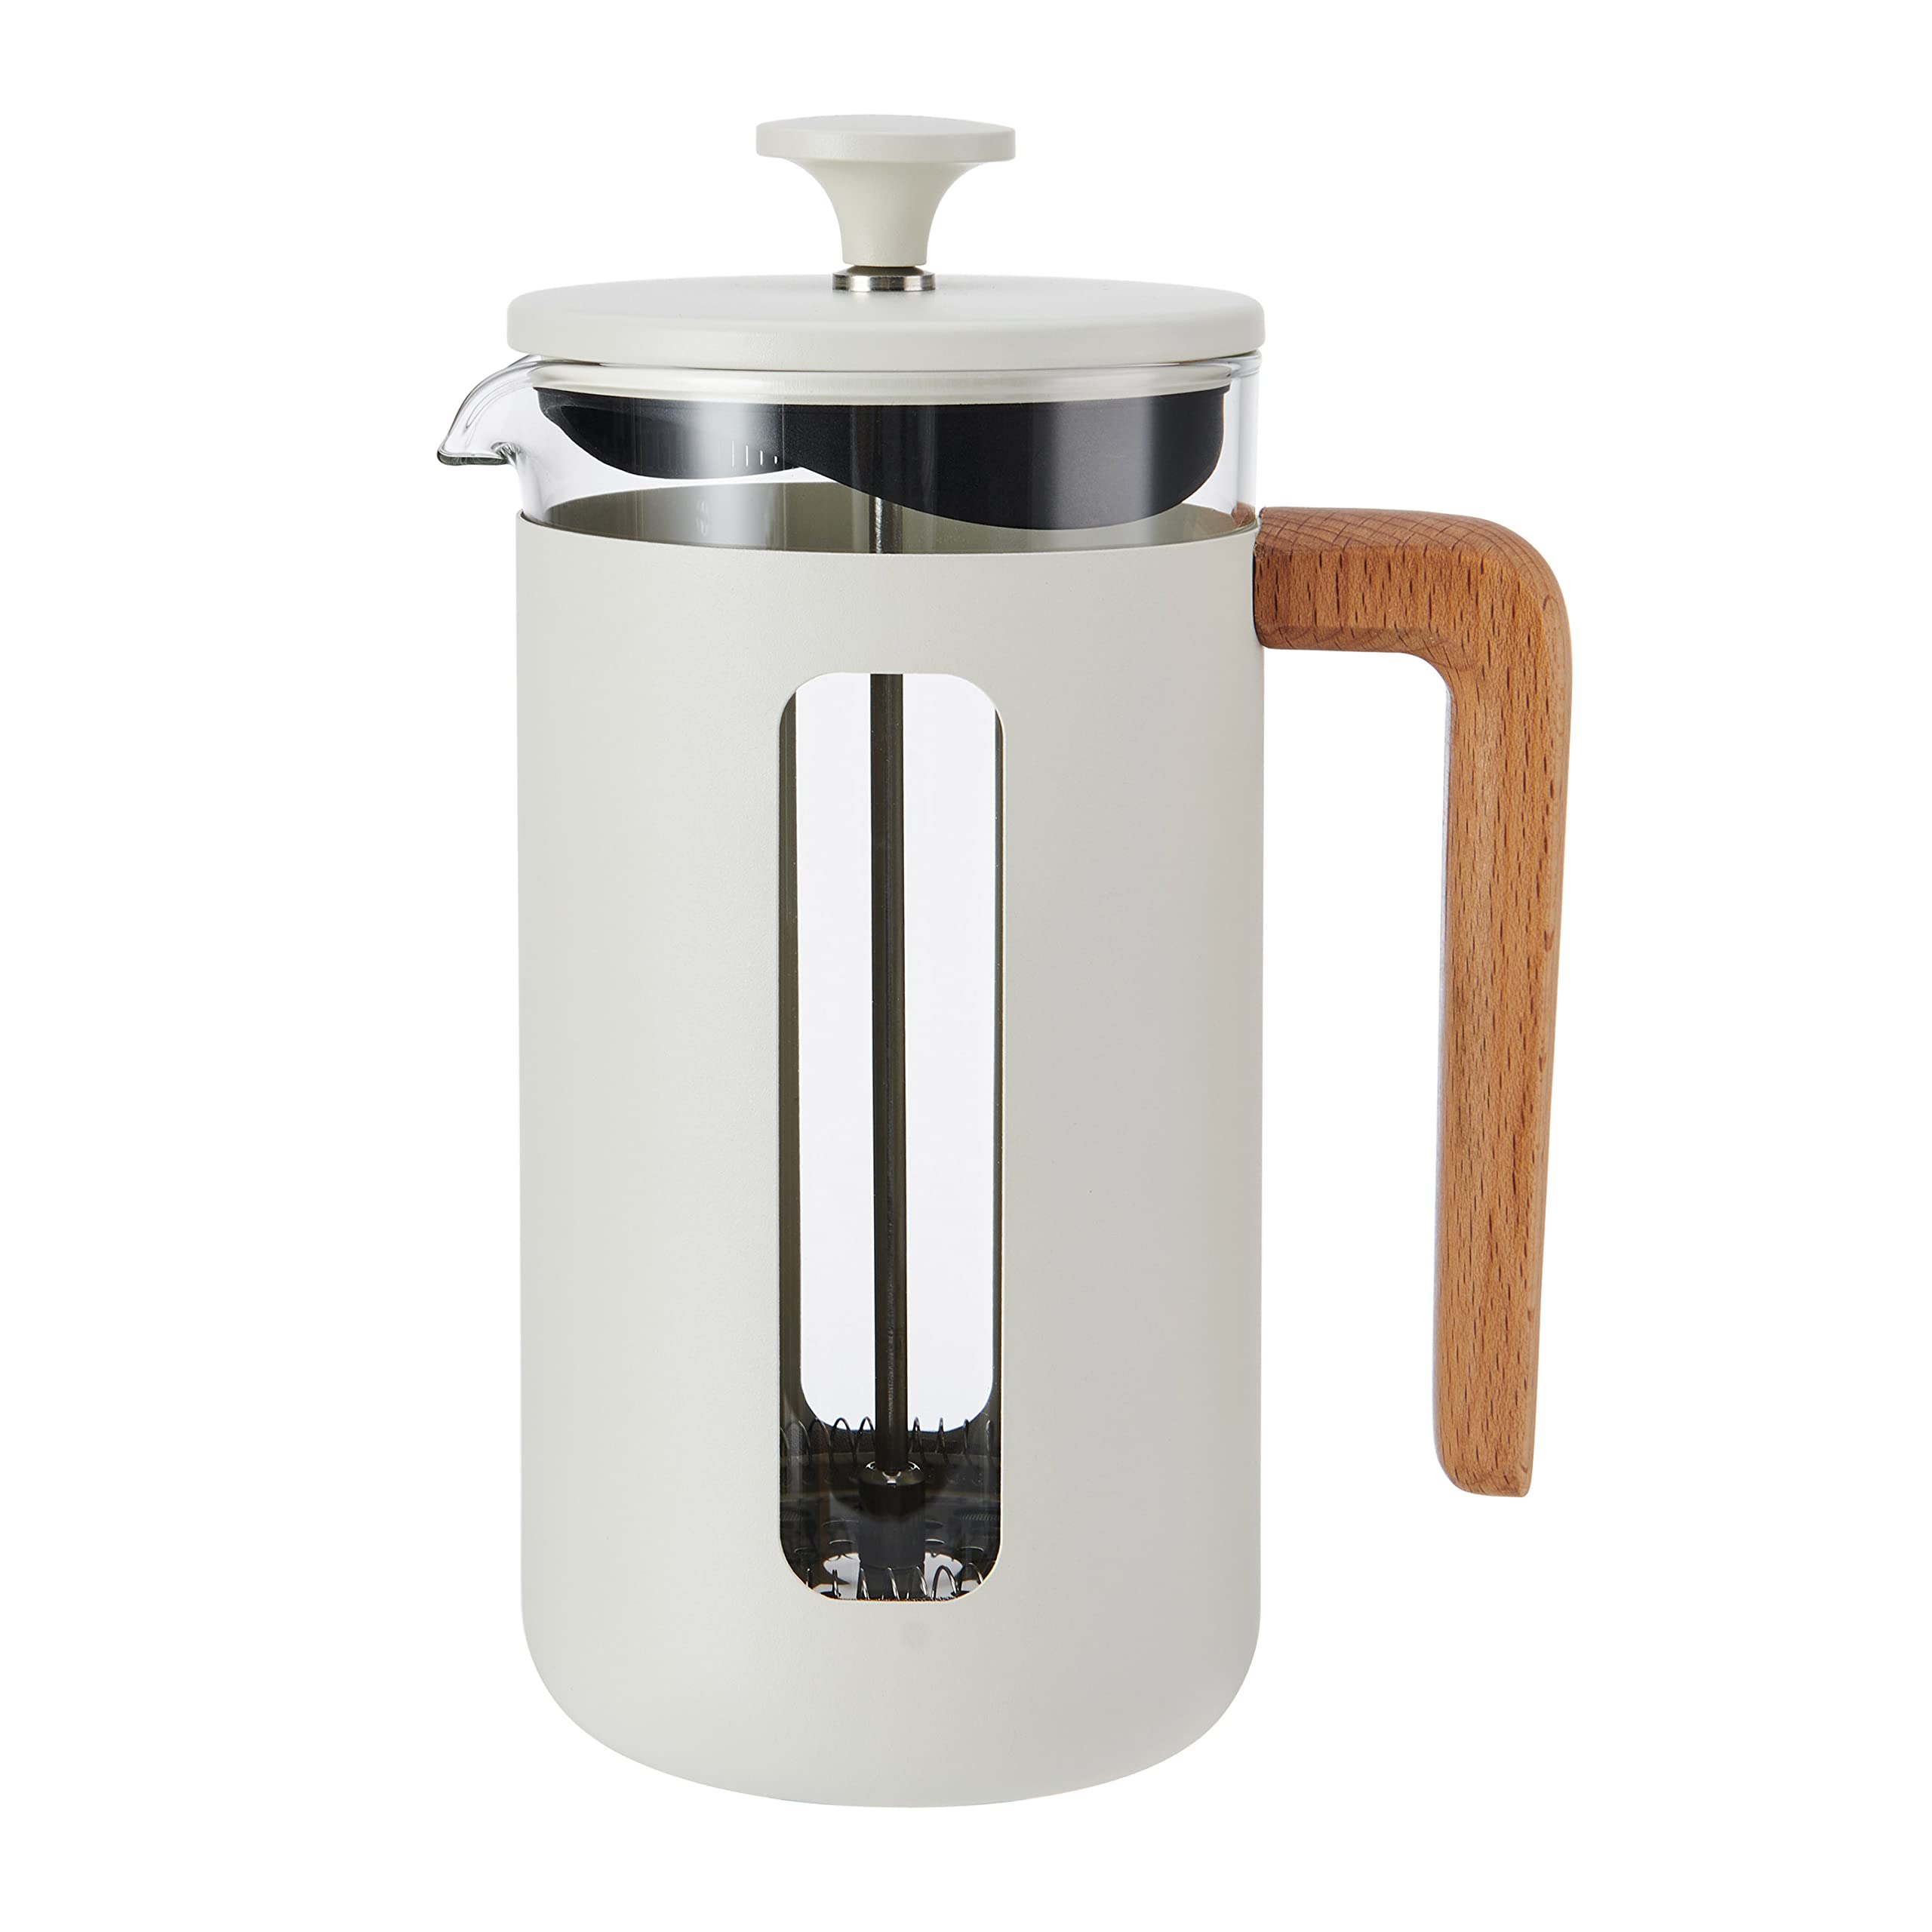 La Cafetière Pisa Cafetière, 8-Cup/1L, Heat-Resistant Borosilicate Glass and Stainless Steel with Easy-Grip Plunger, Large French Press Coffee Maker for Loose Tea and Ground Coffee, Flint